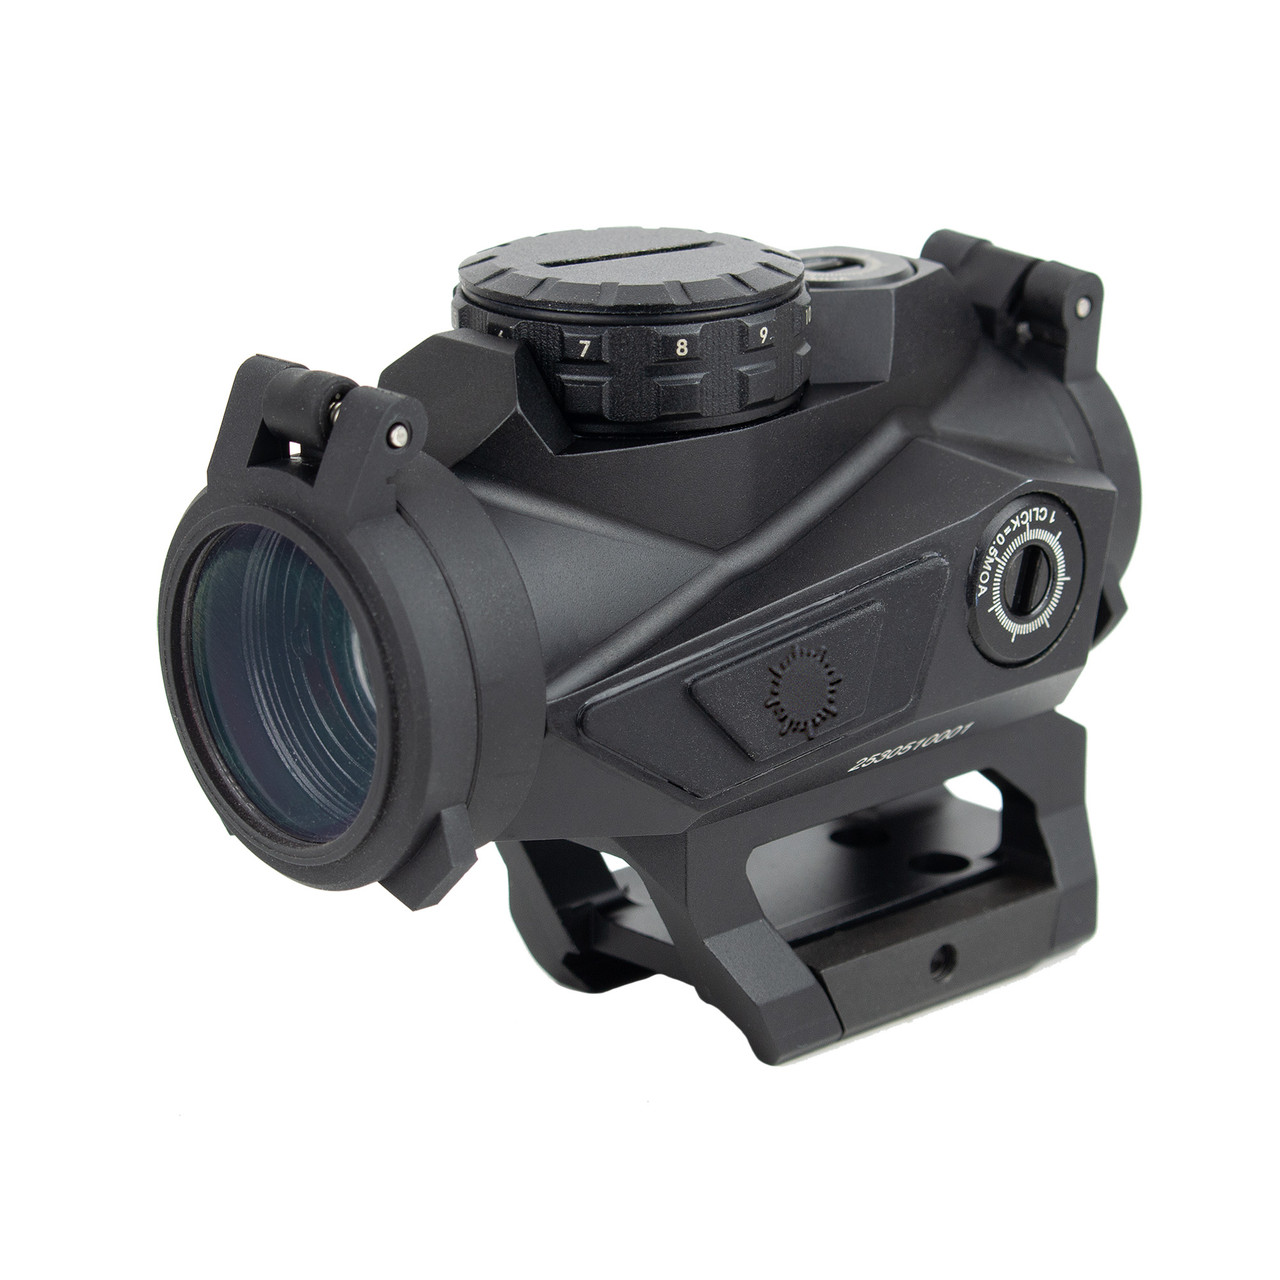 Steiner 8800 T1Xi, Red Dot, 1X Magnification, 2 MOA Dot, 24 Objective, Matte Finish, Black